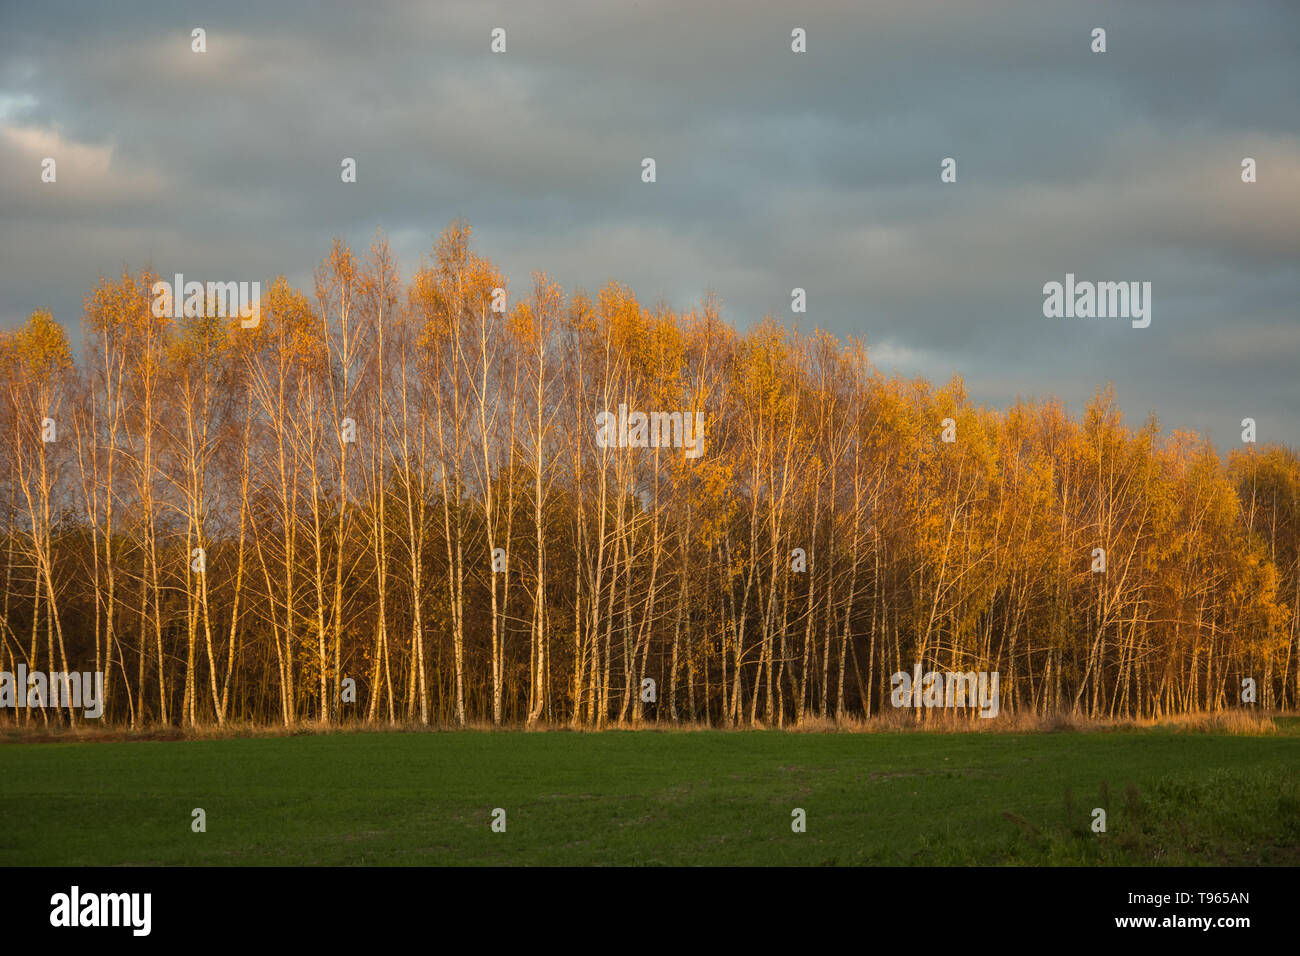 Green meadow, autumn birch forest and gray clouds in the sky Stock Photo